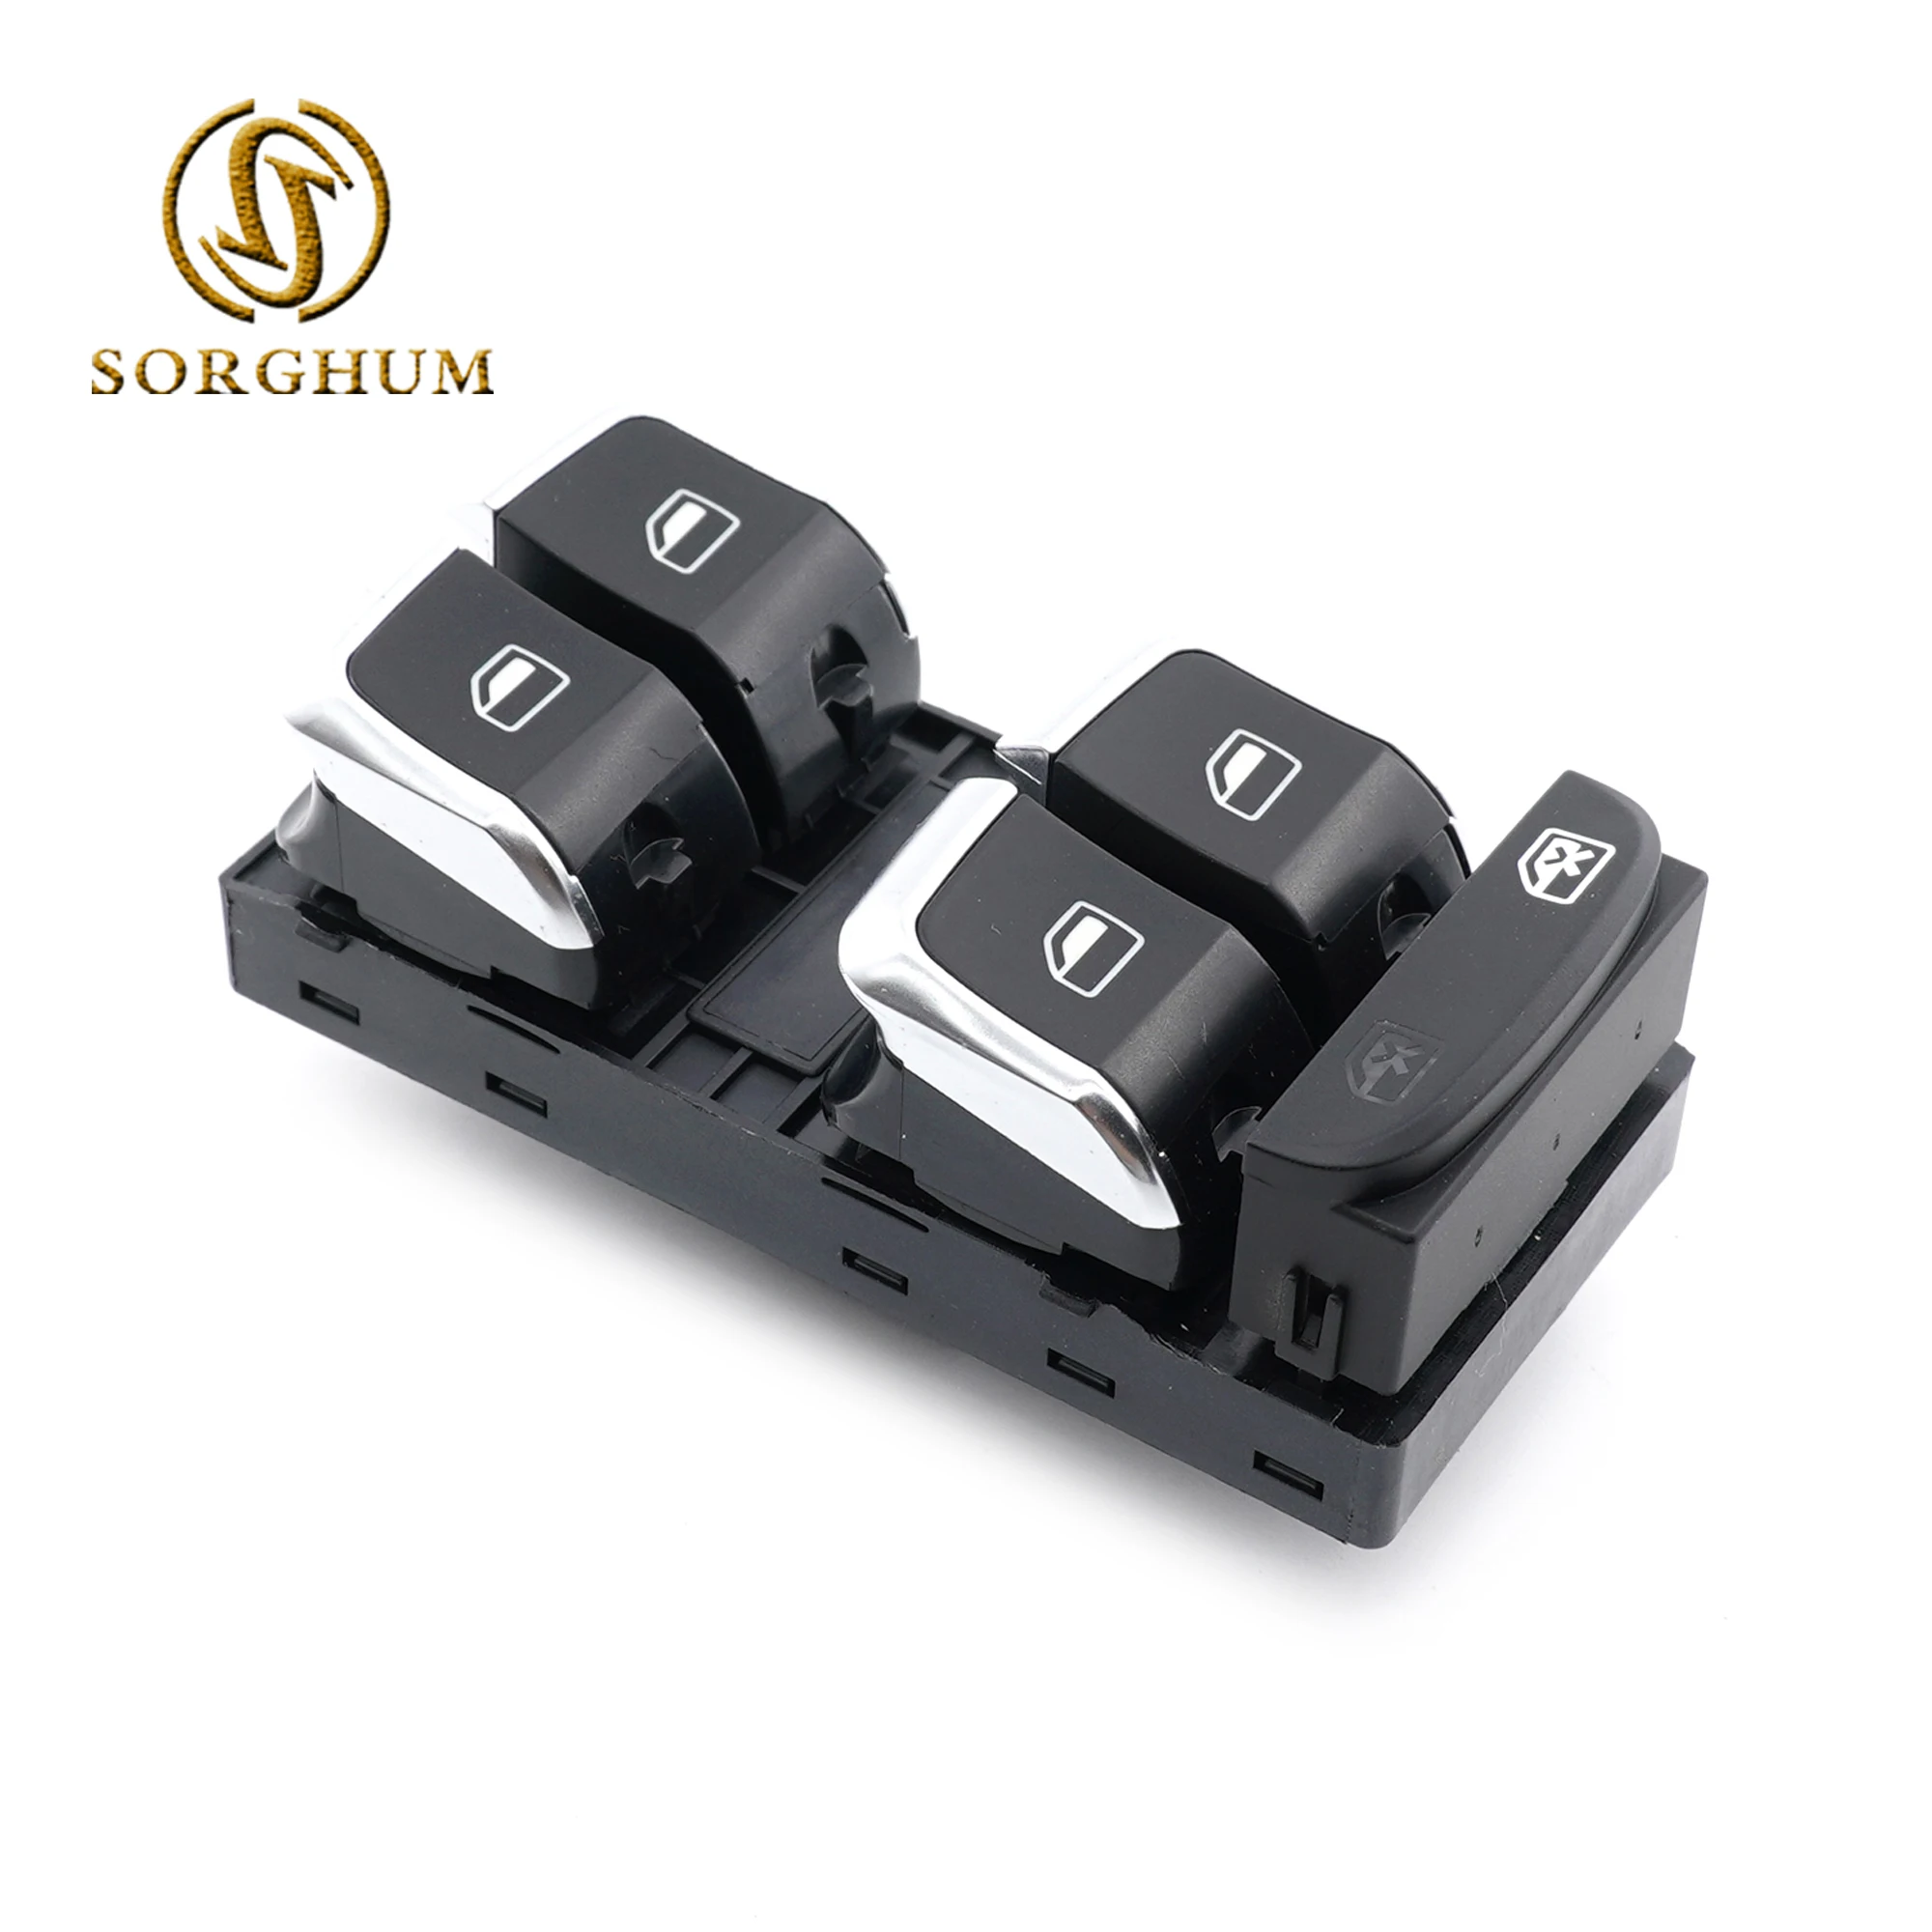 

Sorghum Driver Side Electric Master Power Window Lifter Control Switch Button For Audi A4 S4 Q5 B8 Allroad 8KD959851A 8K0959851F